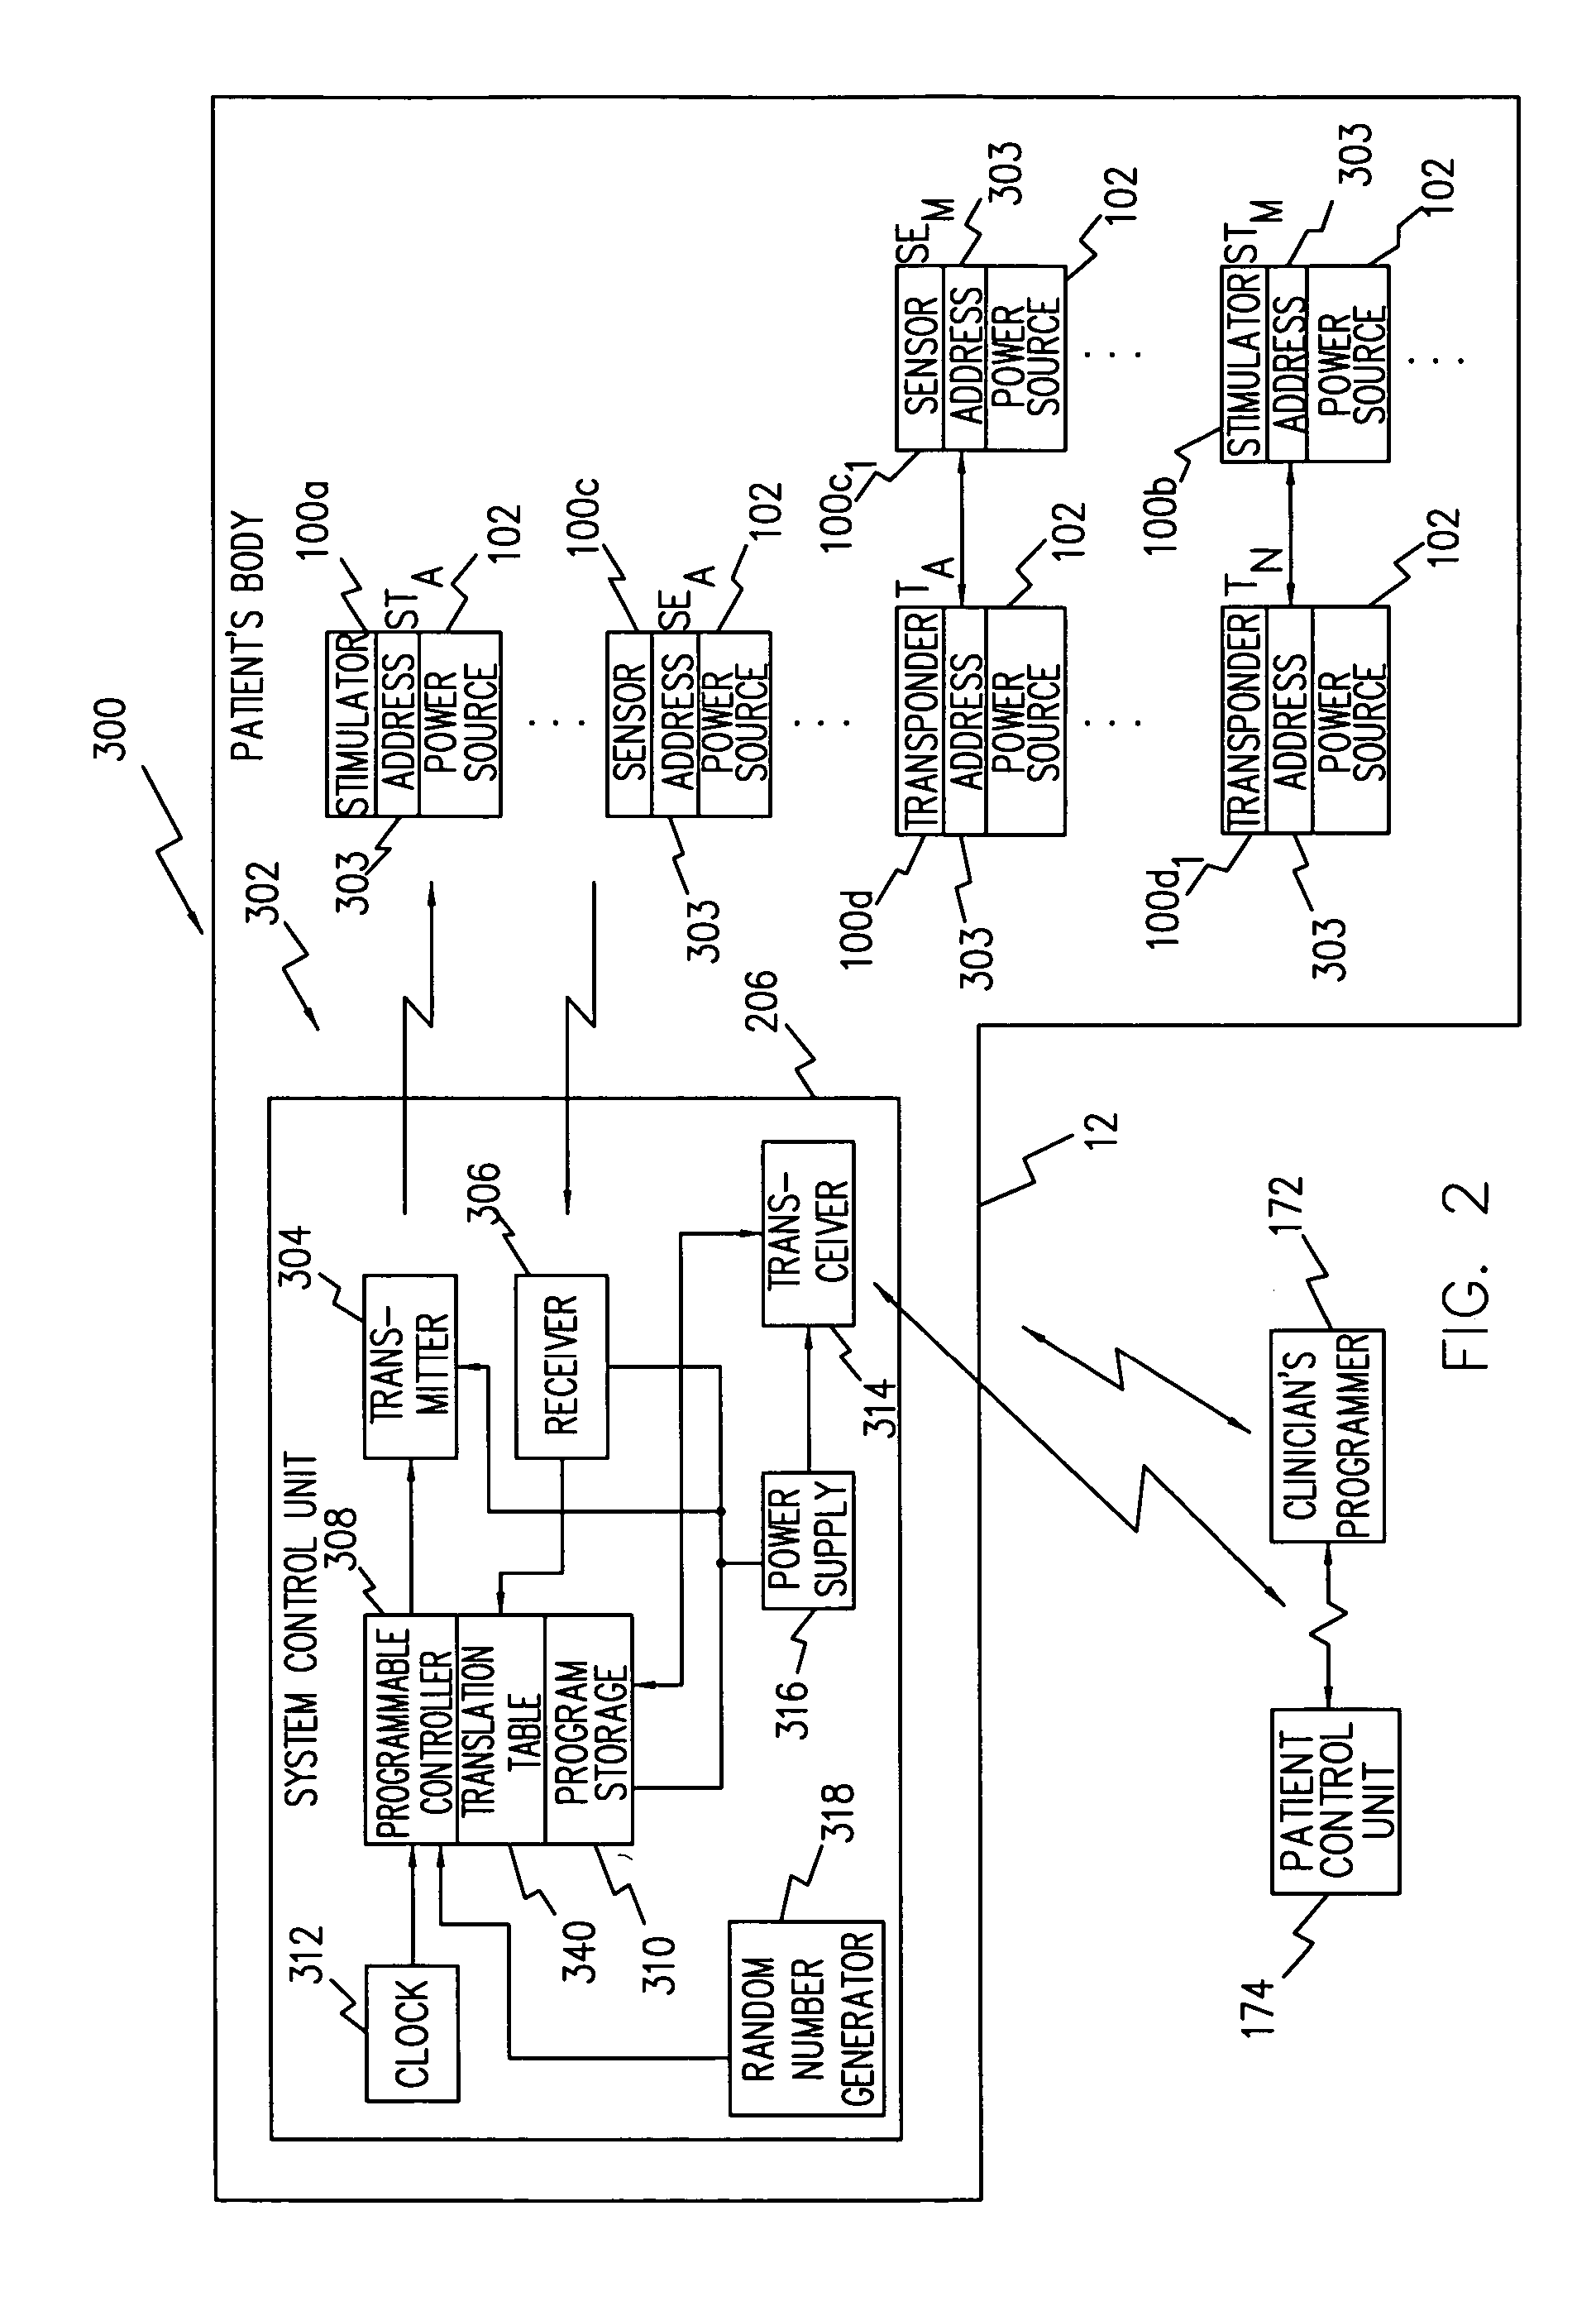 System of implantable ultrasonic emitters for preventing restenosis following a stent procedure